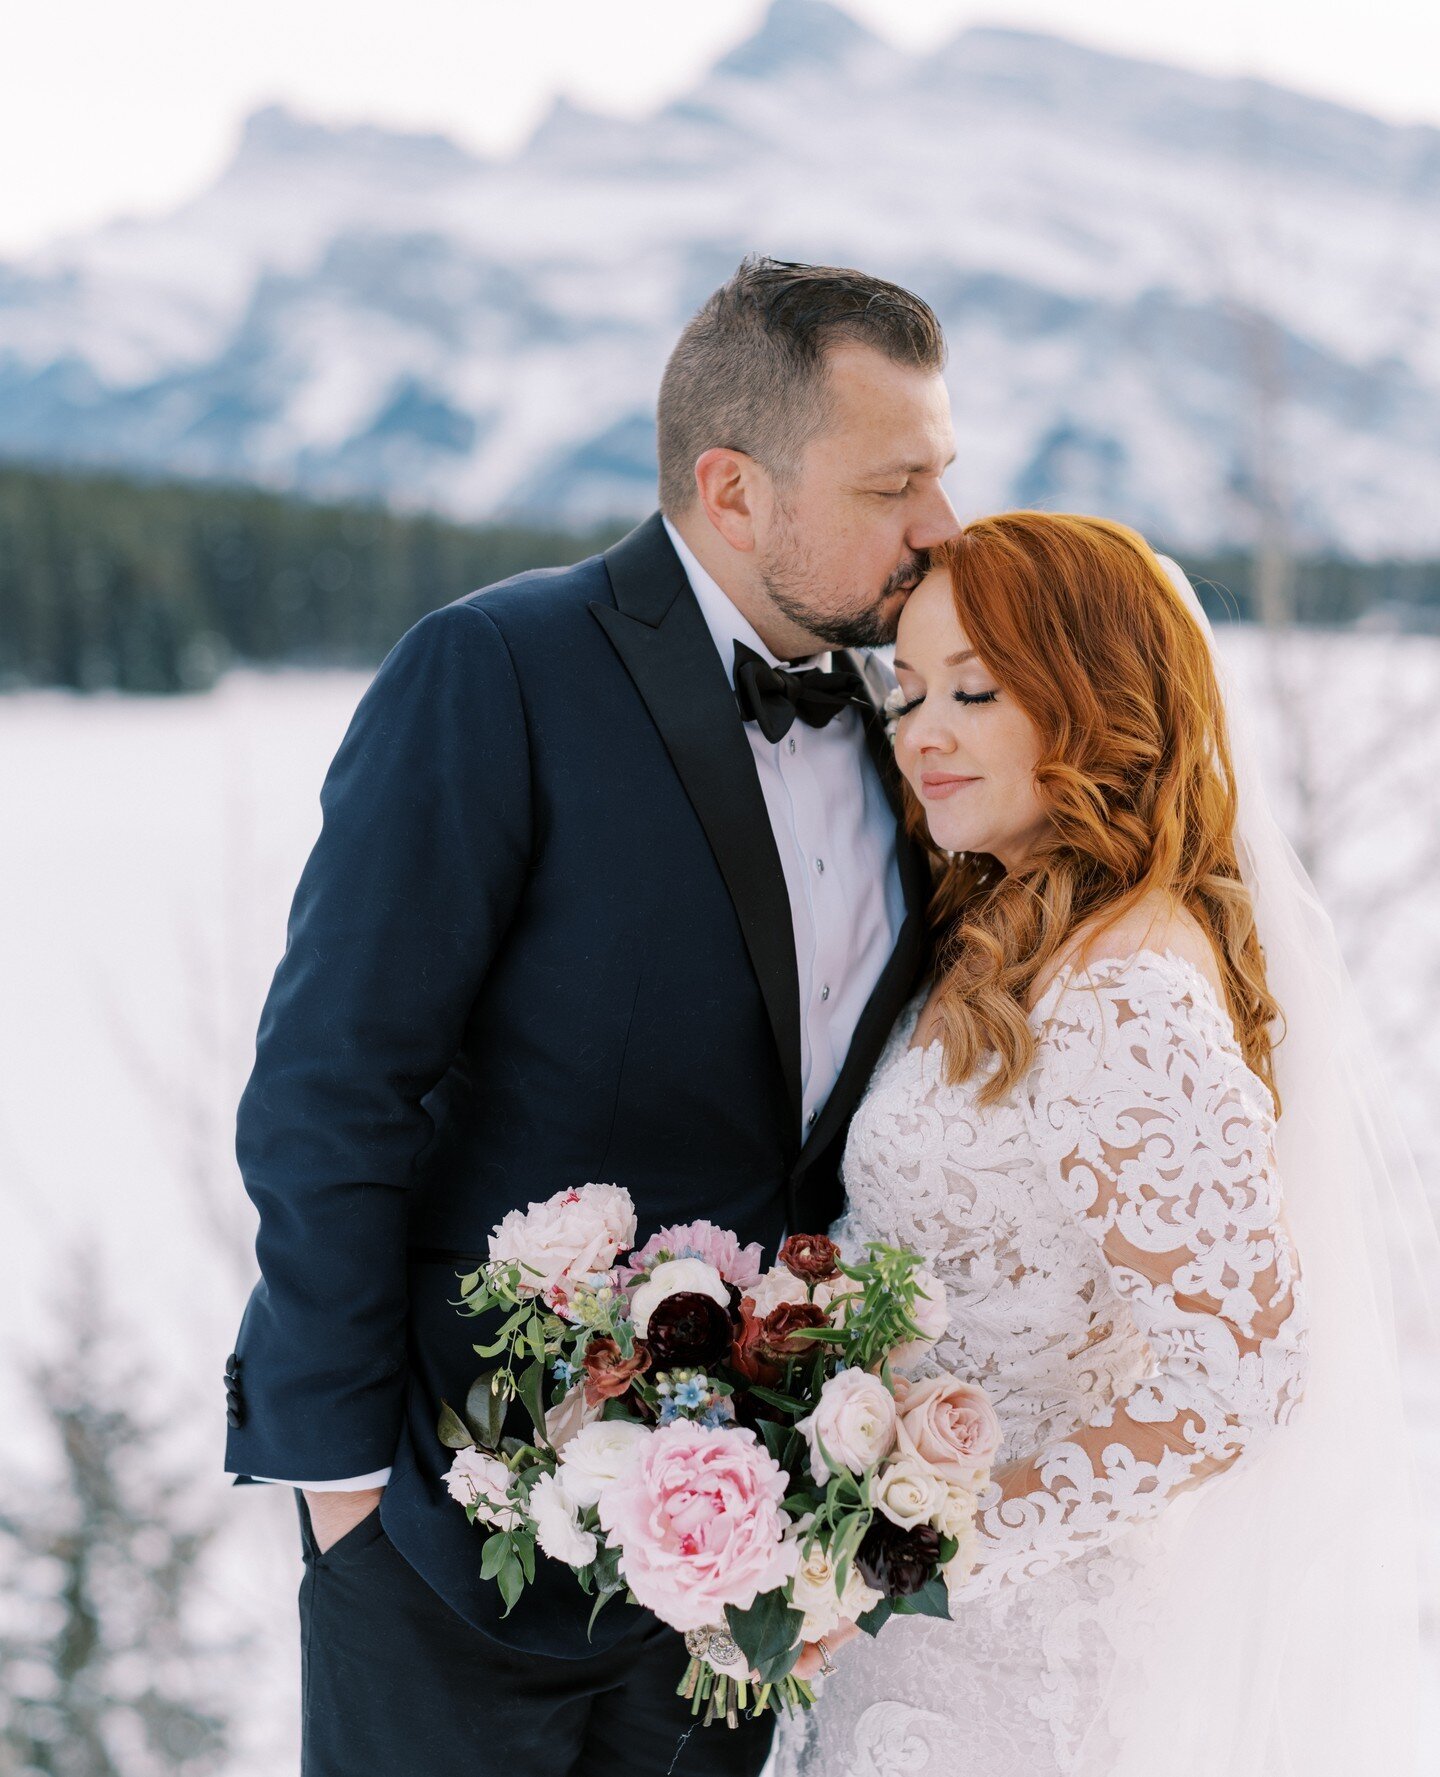 Winter weddings in the mountains are incredible. The summer is amazing too, okay weddings year round in the mountains are incredible, BBUUTTTT in the winter there is less people so you can go to cooler spots for photos without the risk of closed road